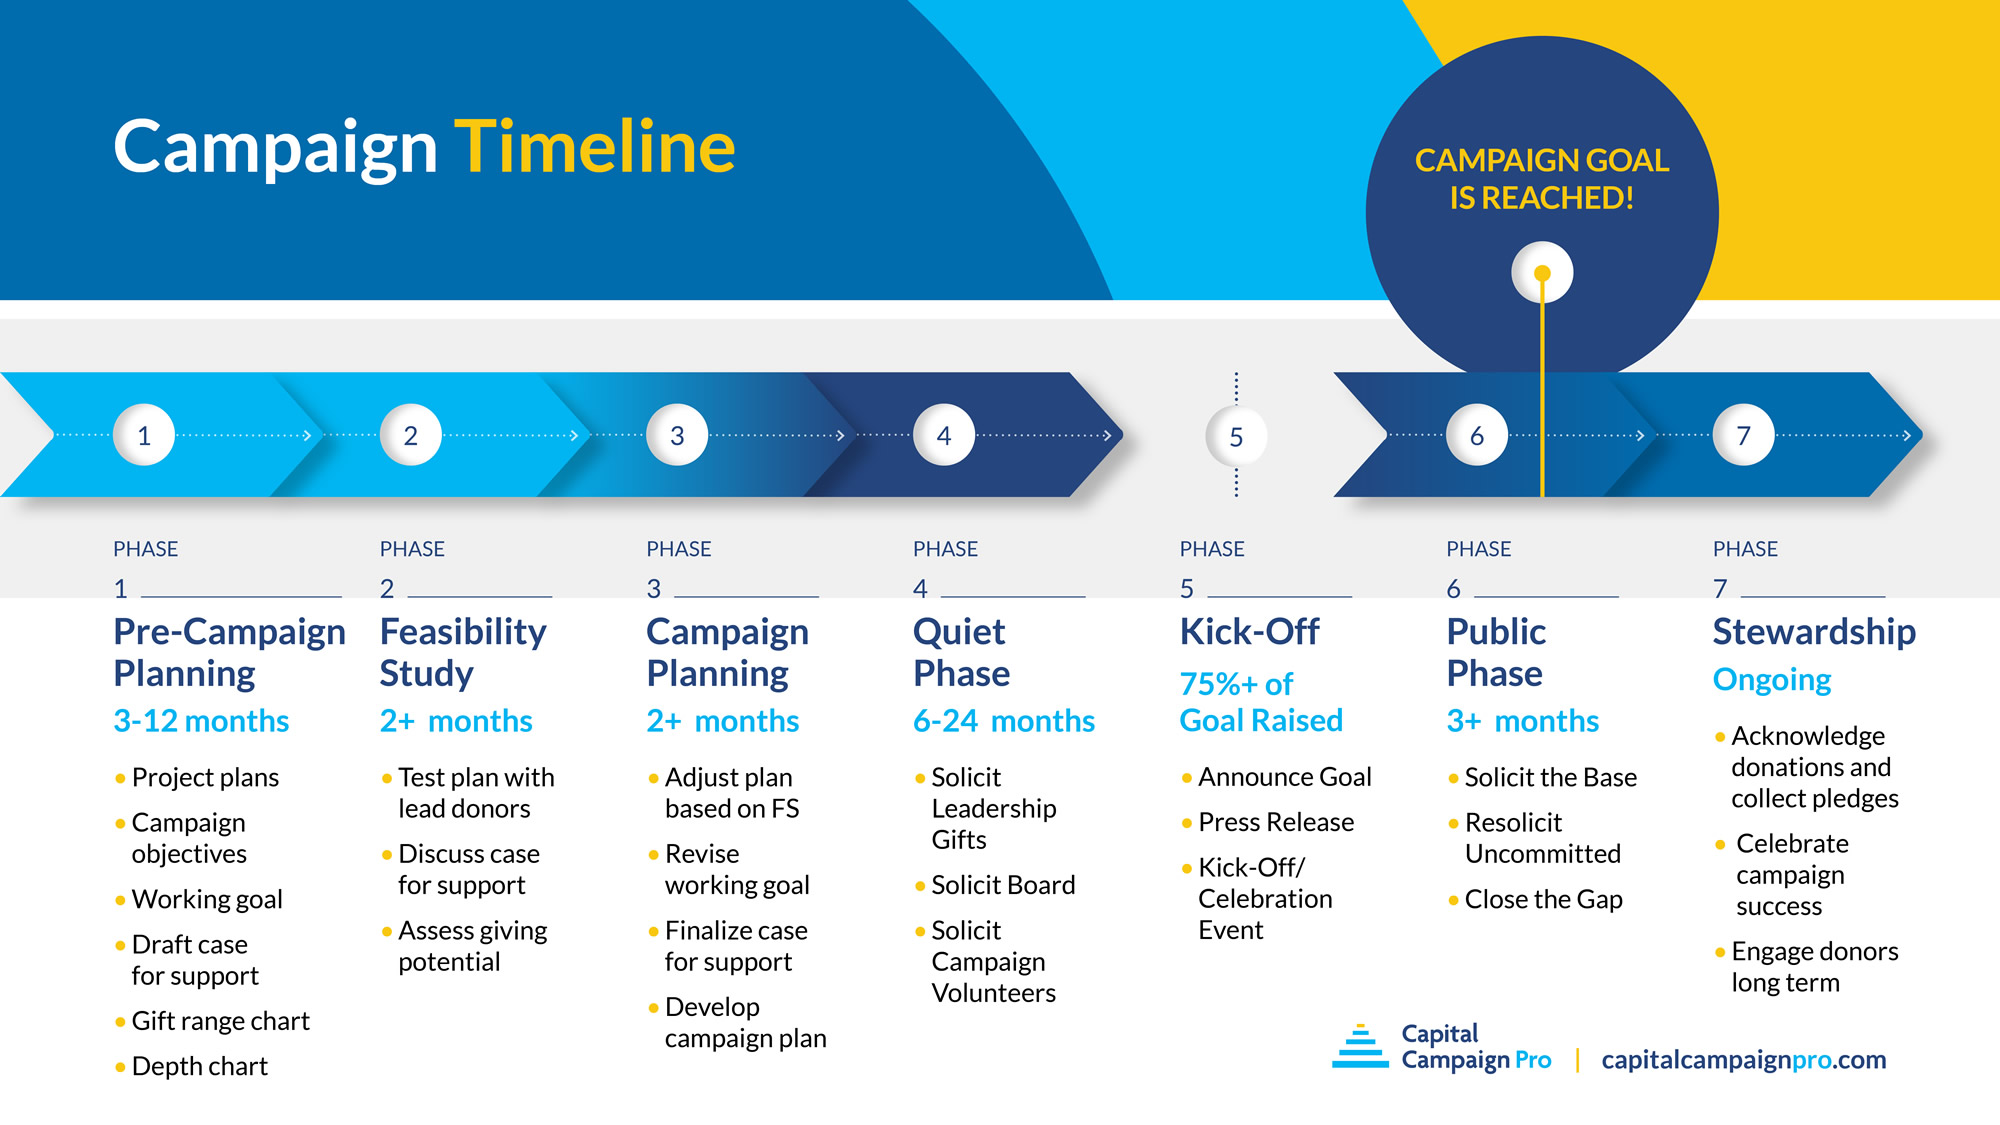 Your capital campaign plan will be created during the first three phases of this graphic.